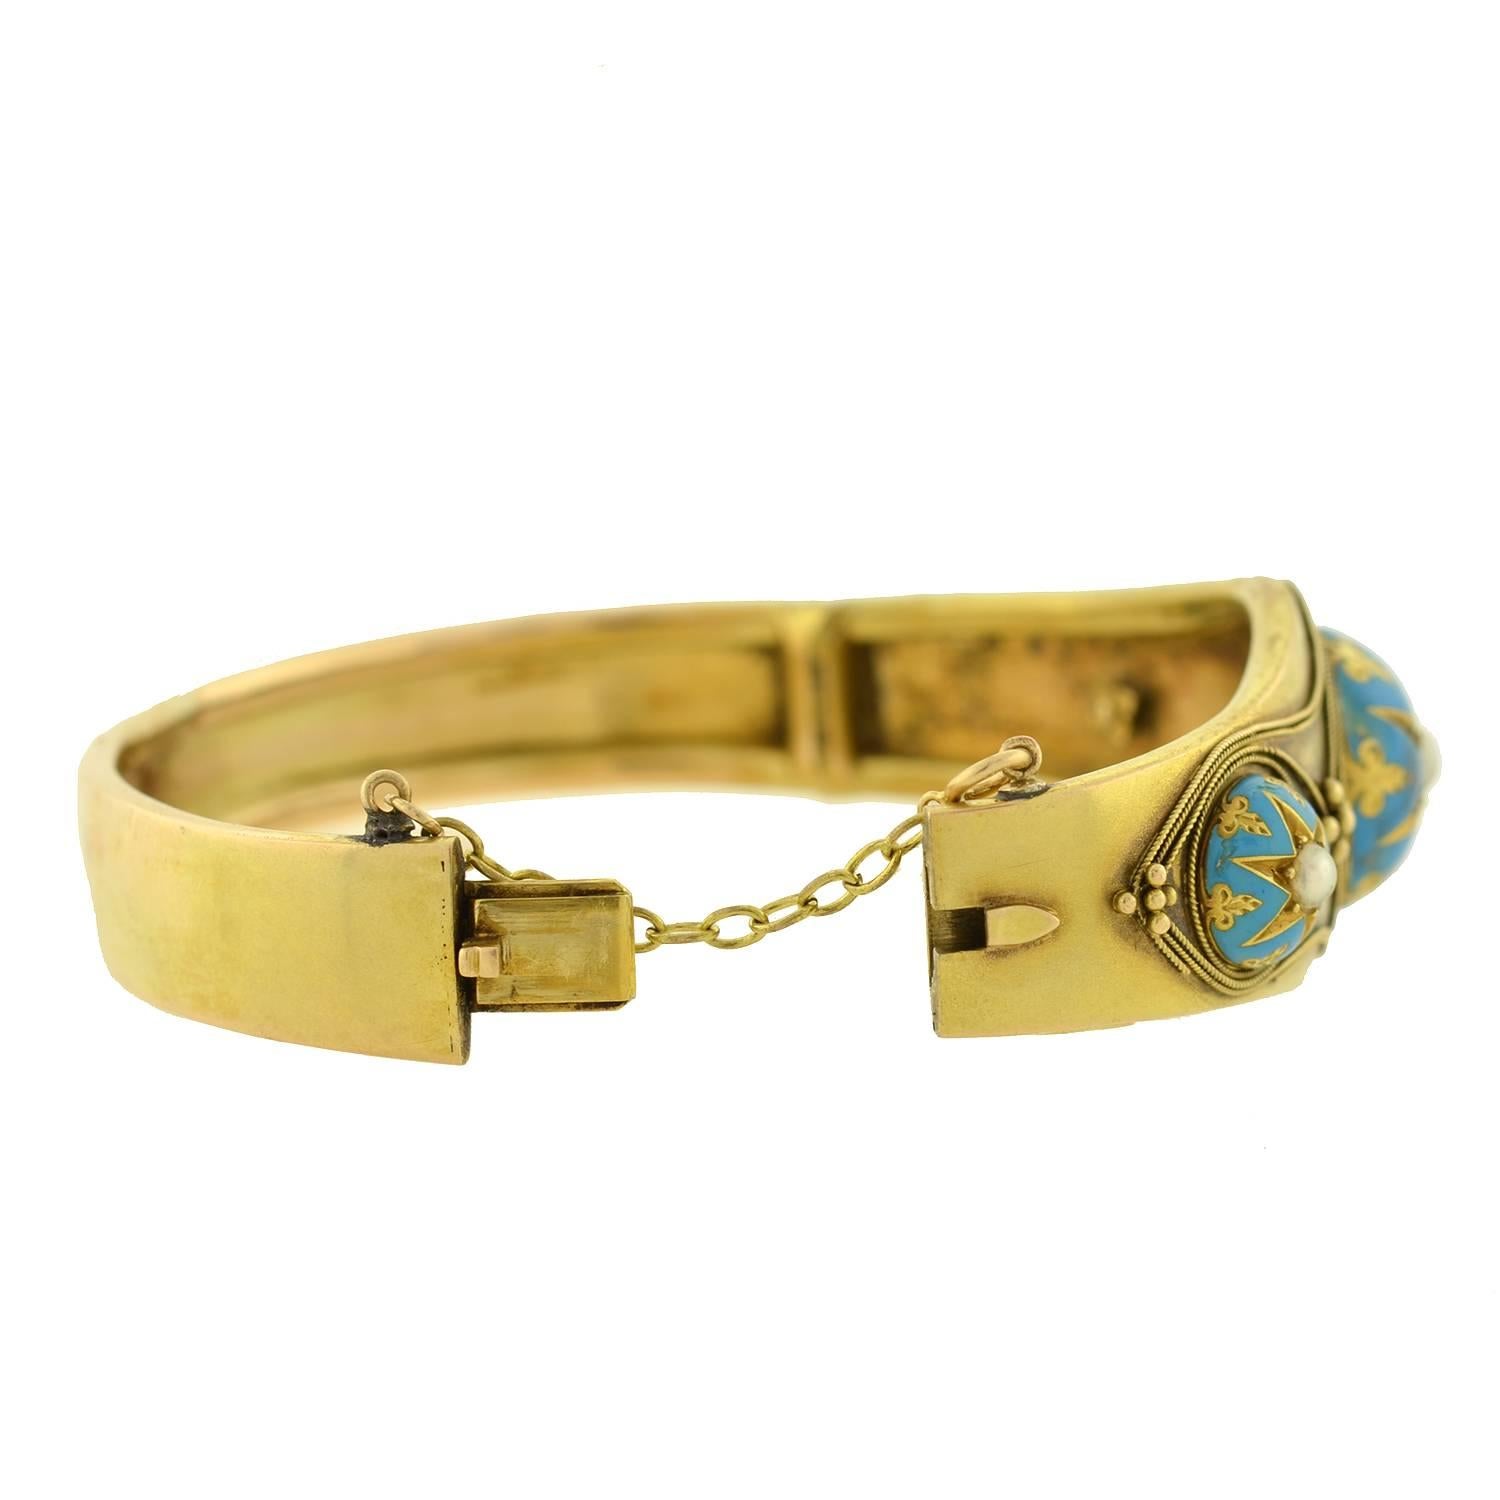 A beautiful and unusual bangle bracelet from the Victorian (ca1880) period! Crafted in 15kt gold (indicating English origin), this fabulous piece has a very eye-catching design. Three raised domes decorate the front, each with a starburst motif and